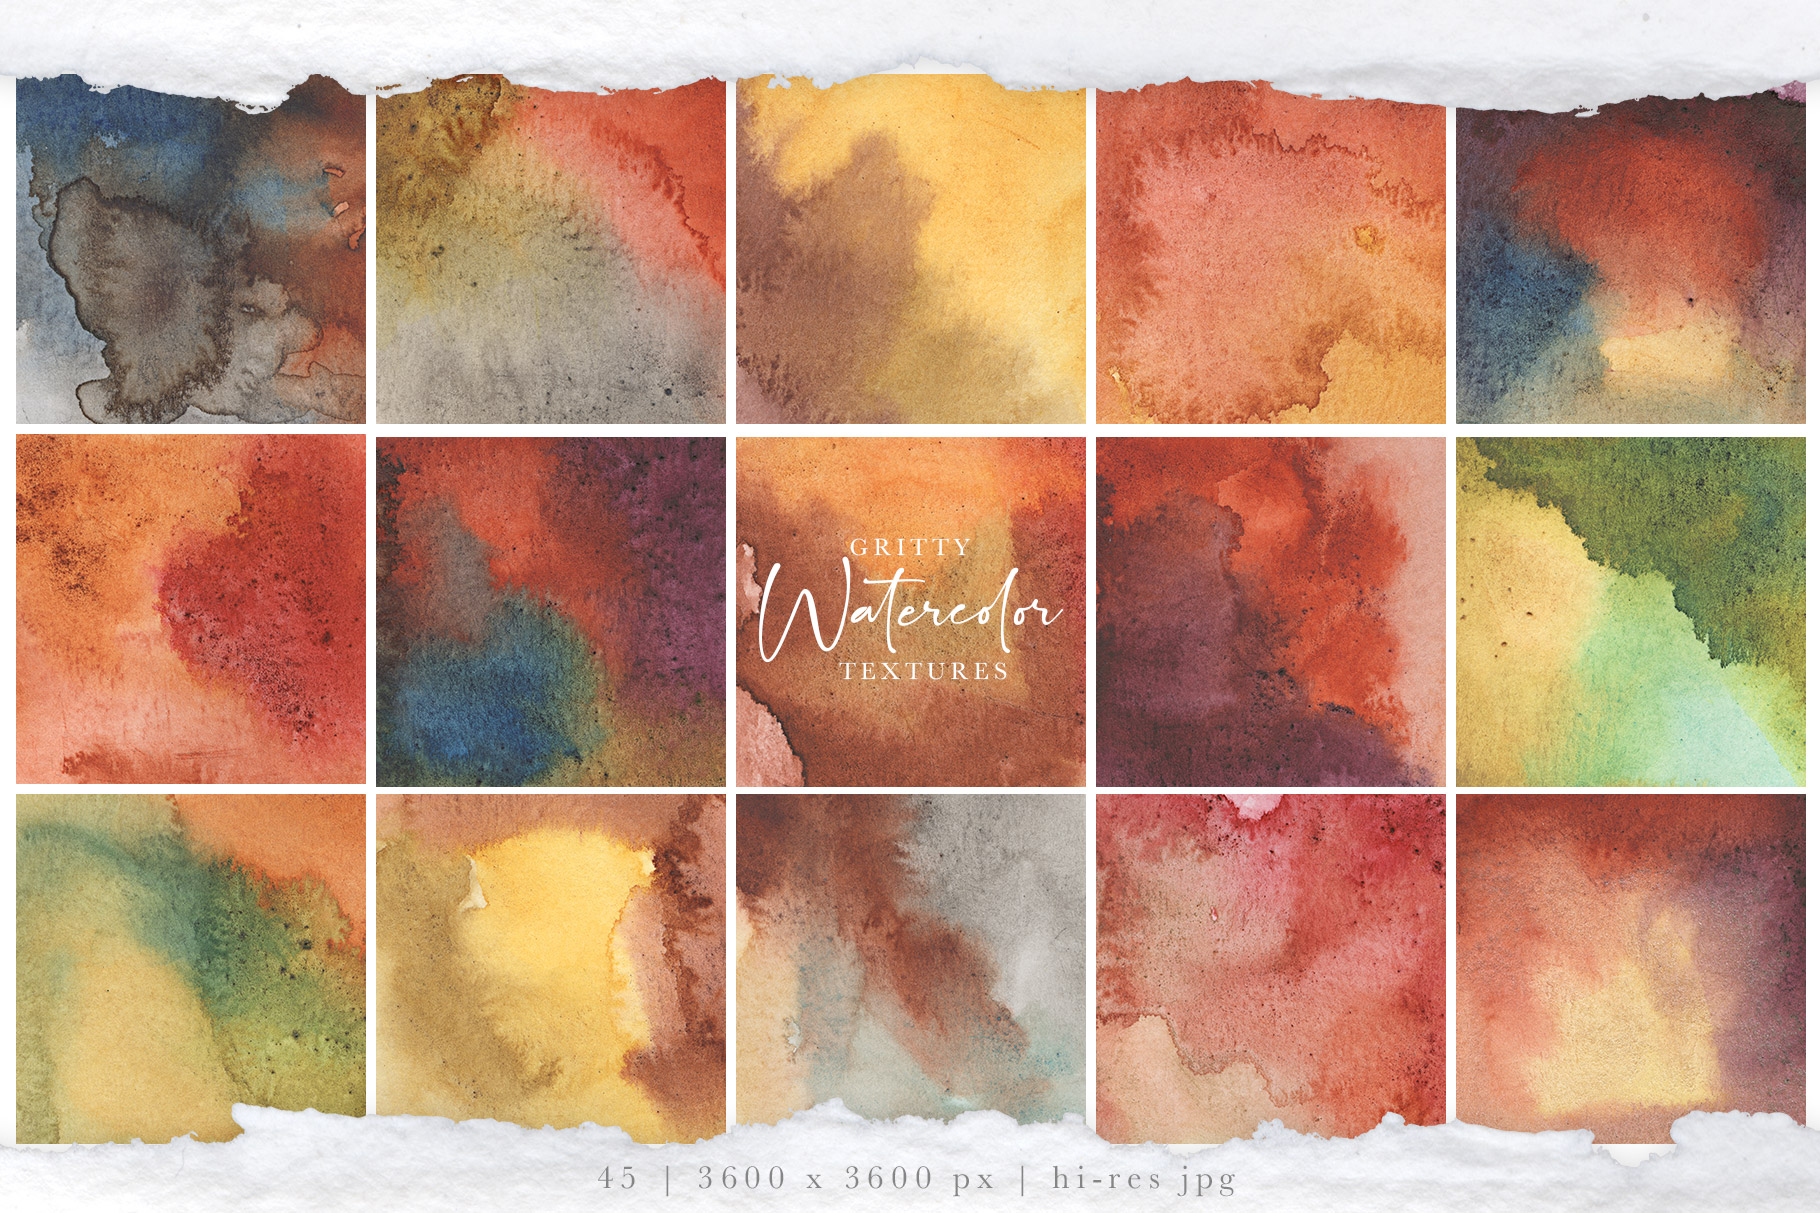 Gritty Watercolor Textures Vol. 1